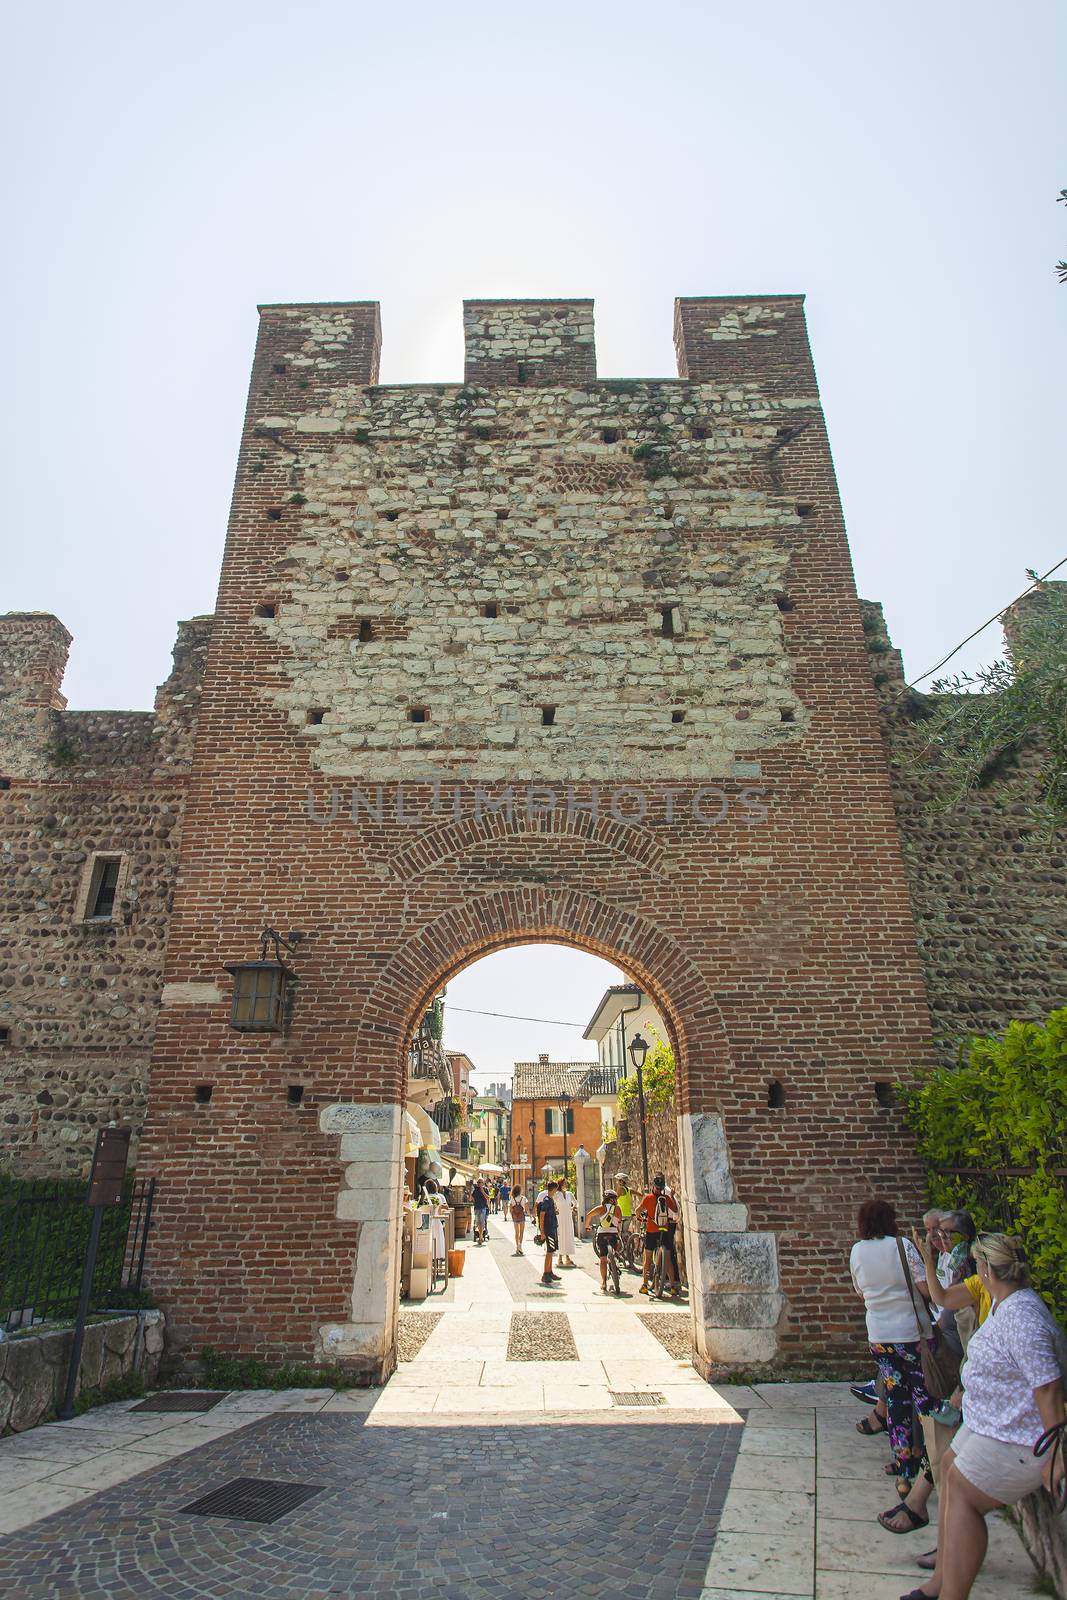 LAZISE, ITALY 16 SEPTEMBER 2020: Medieval Castle of Lazise in Italy under a blue sky